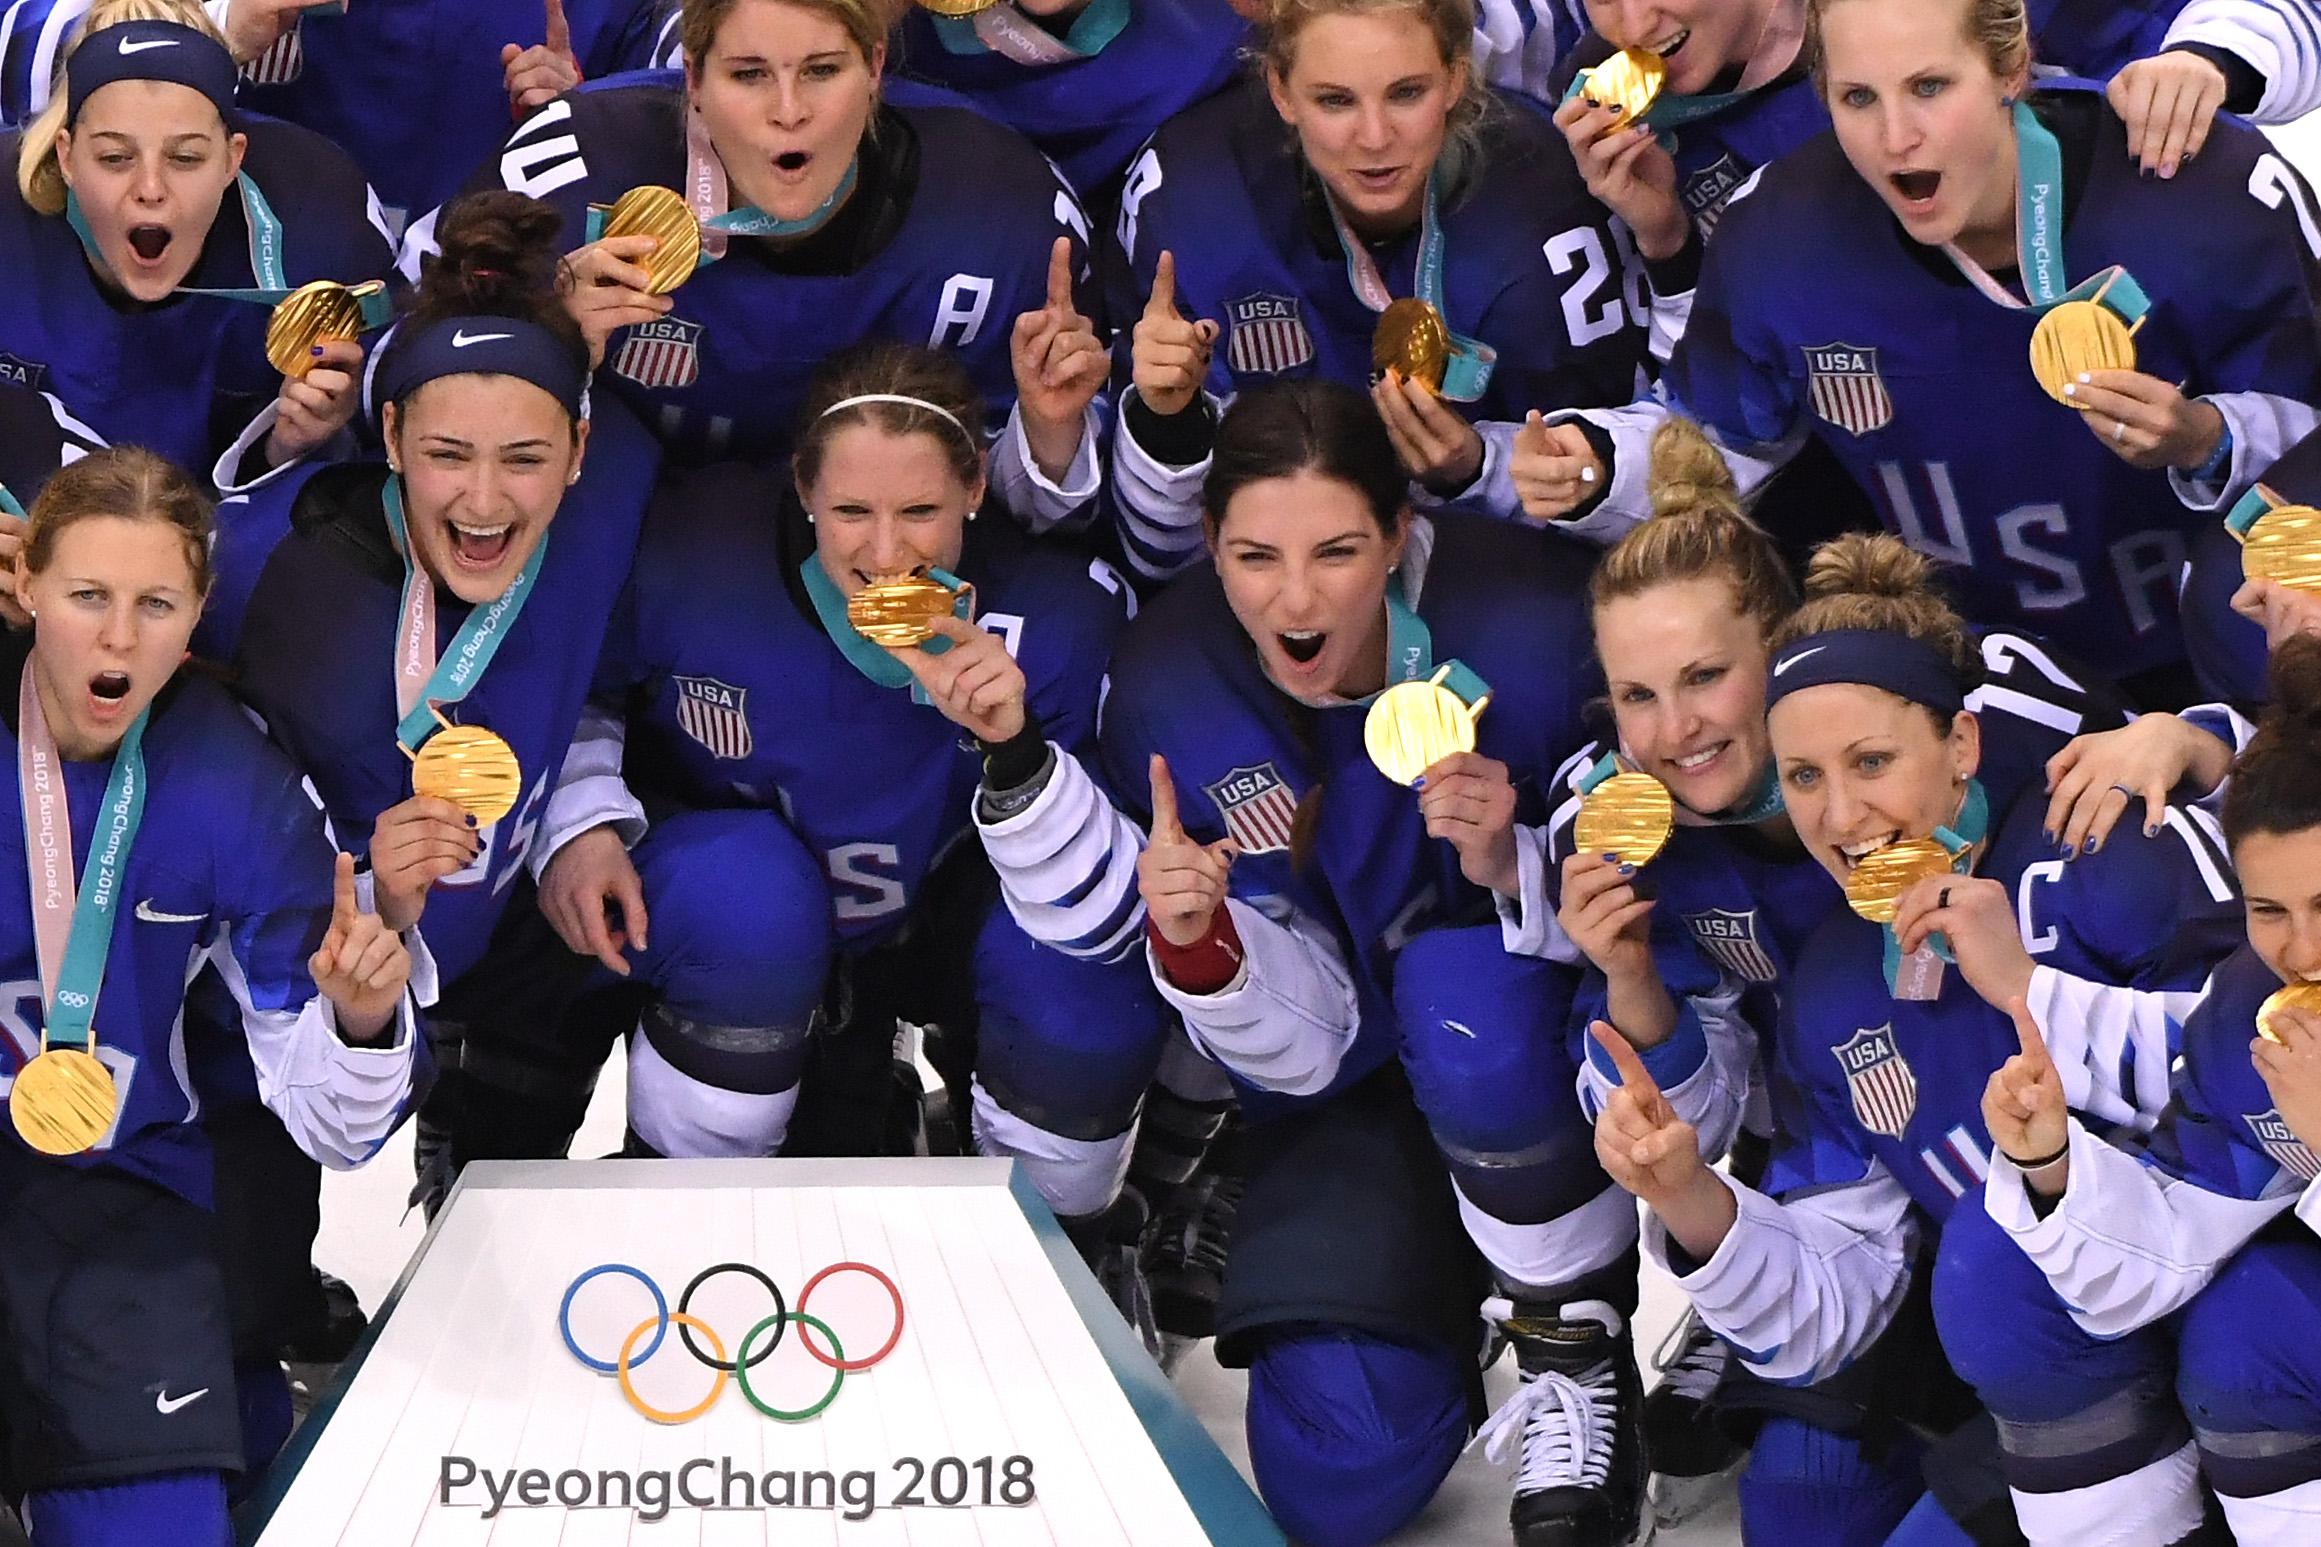 The U.S. women’s hockey team poses with their gold medals.